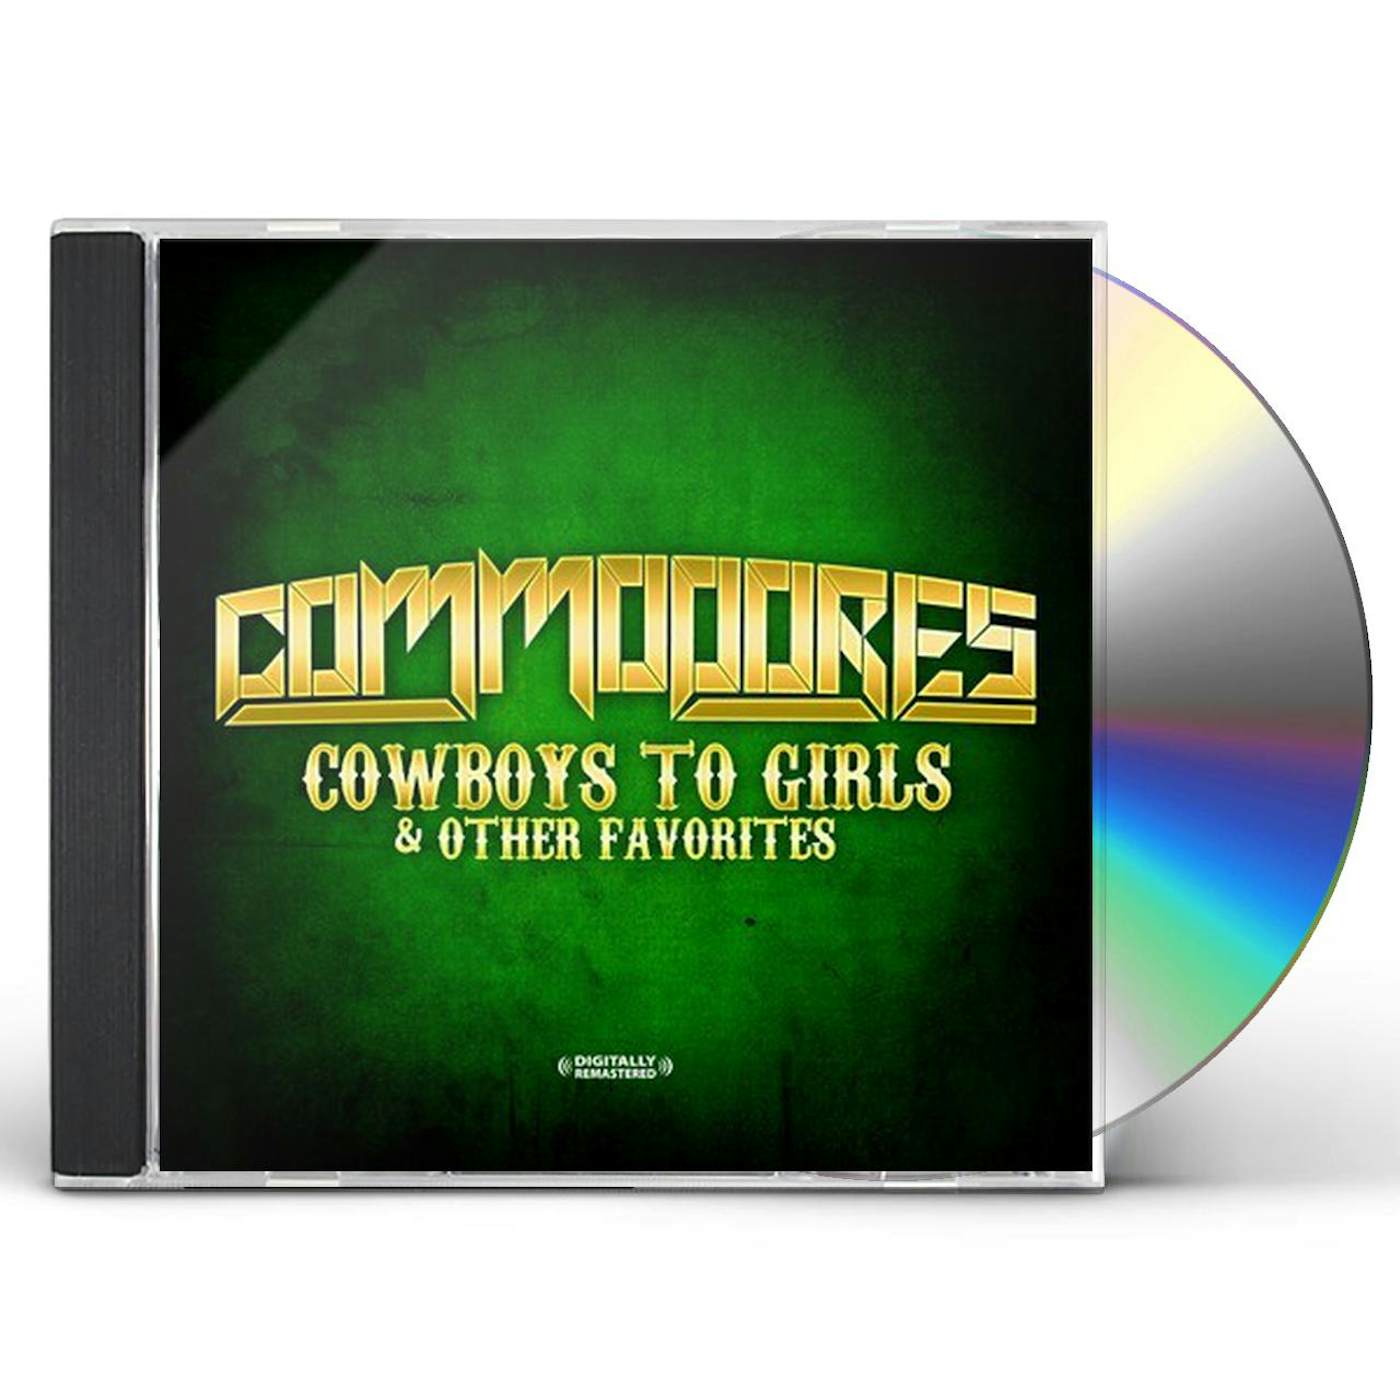 Commodores COWBOYS TO GIRLS & OTHER FAVORITES CD